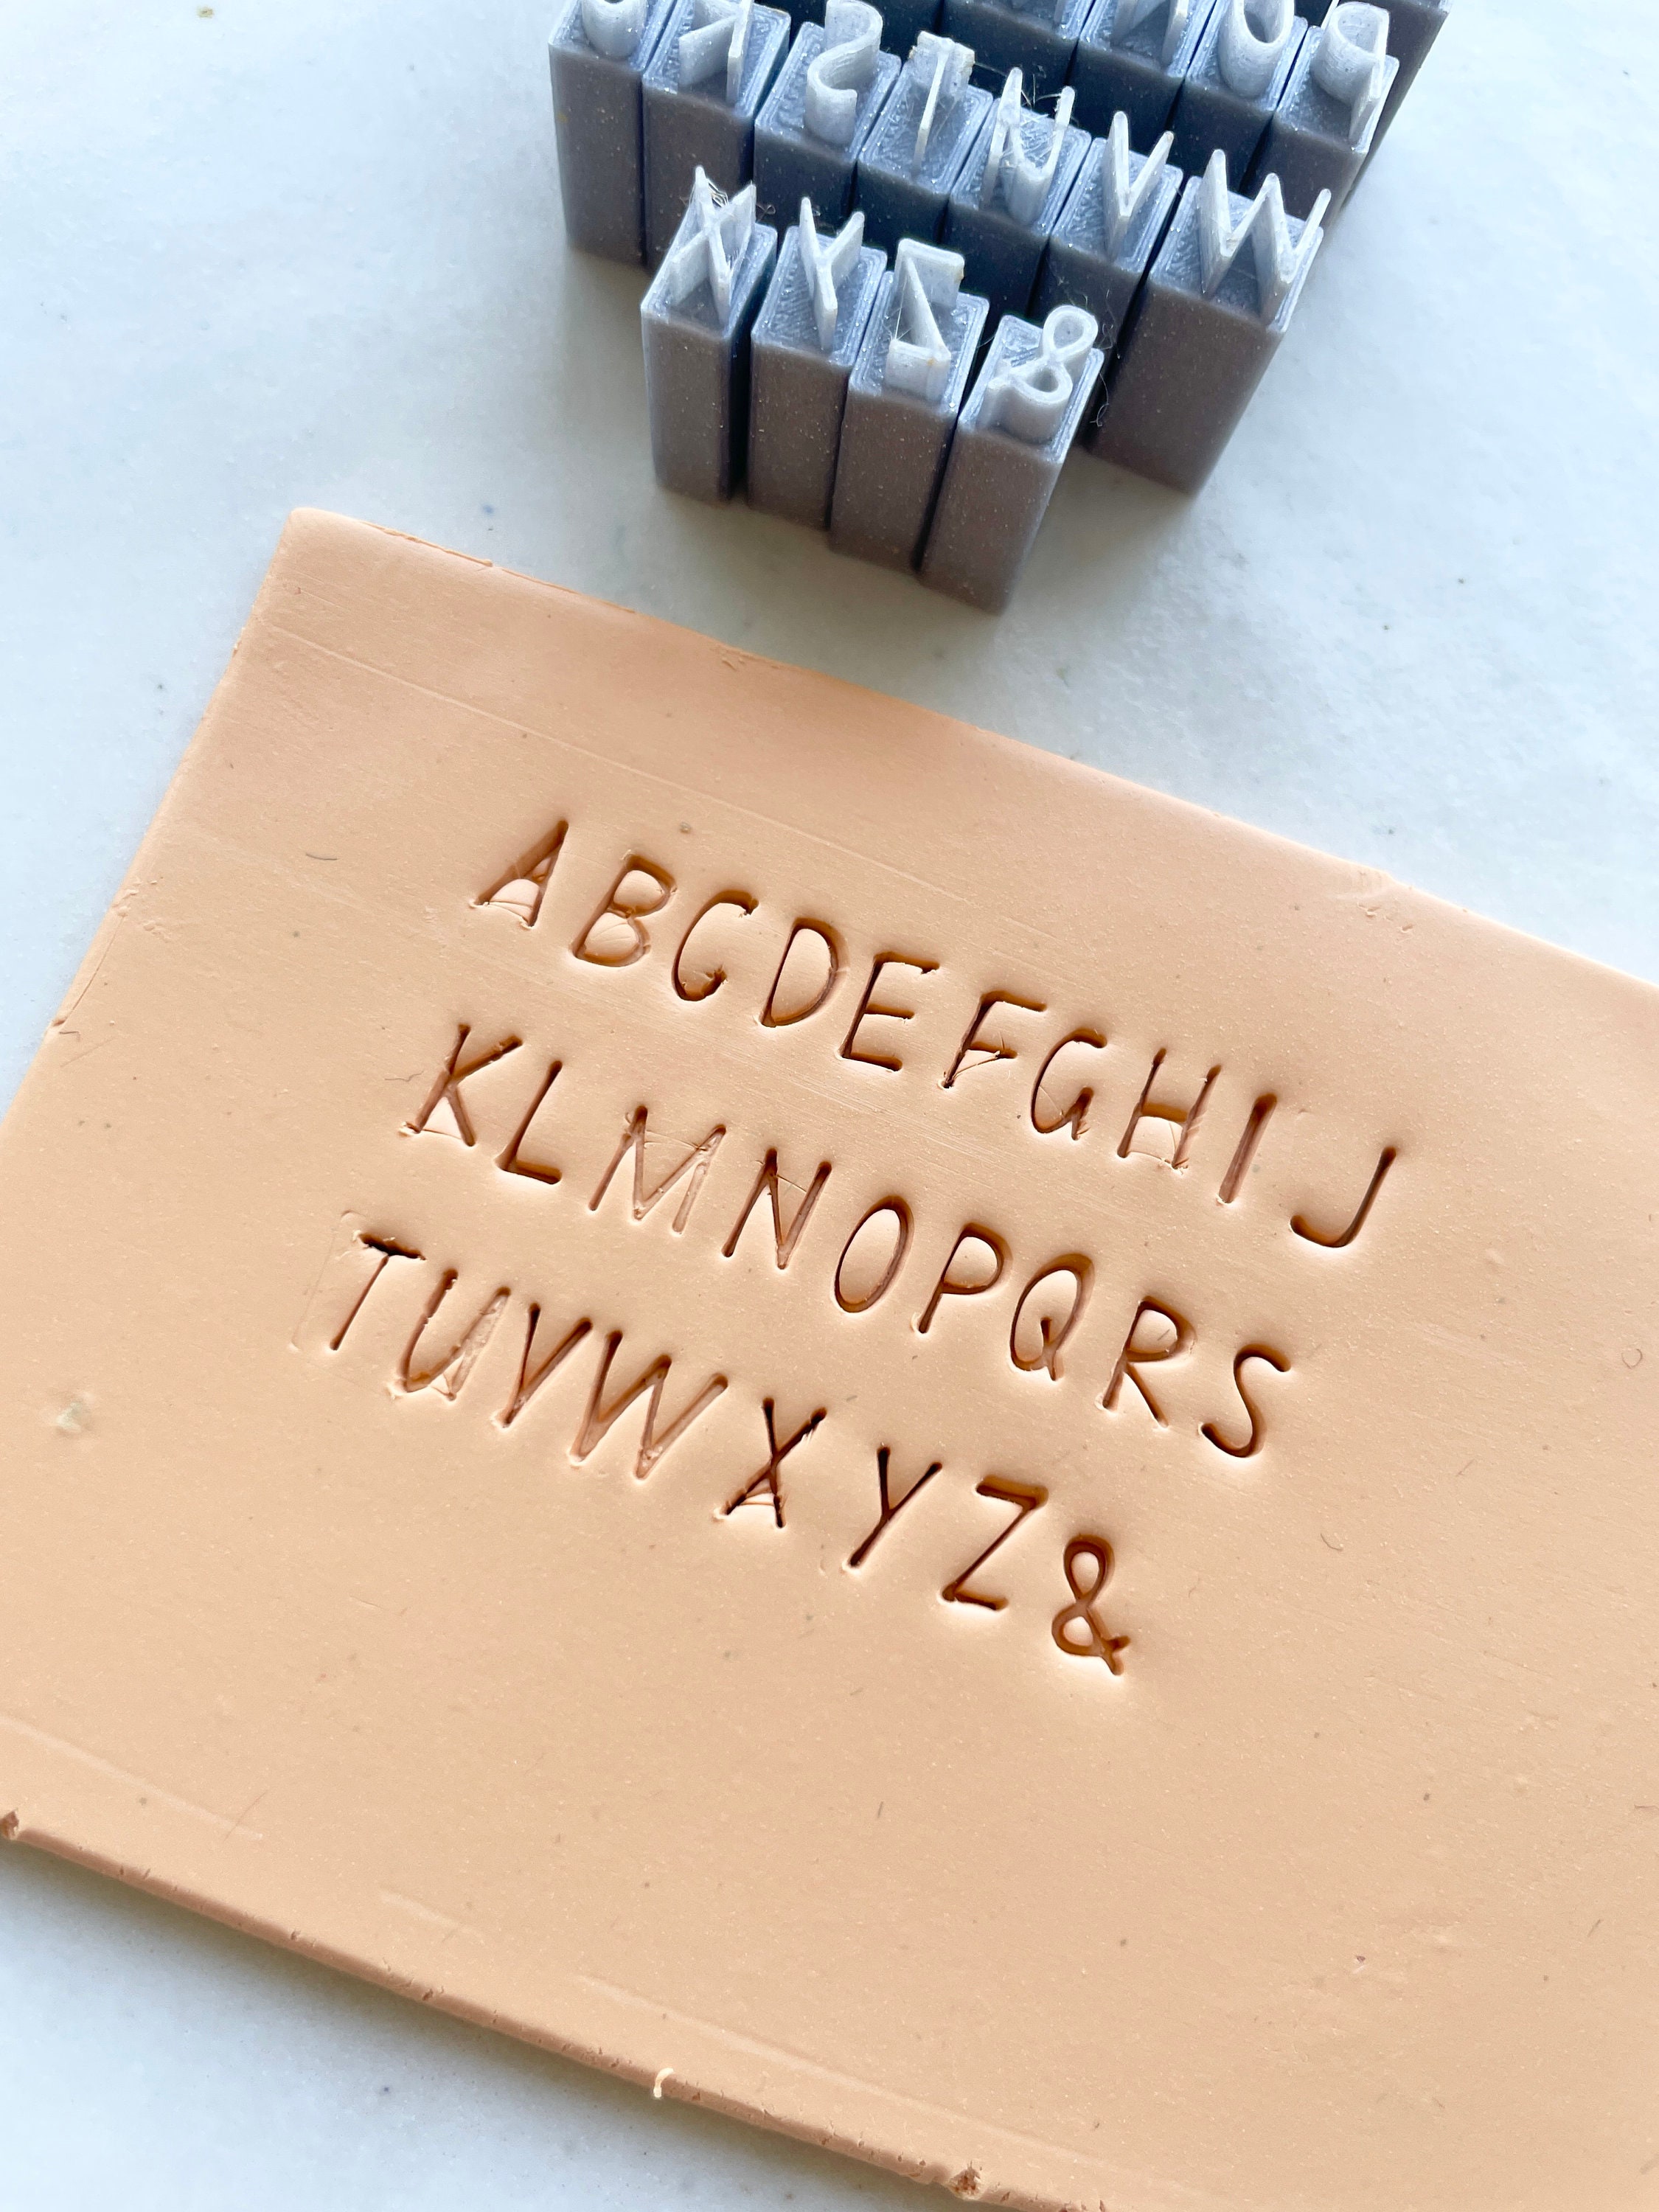 ALPHABET LETTER STAMPS FOR POLYMER CLAY! We have recently redesigned